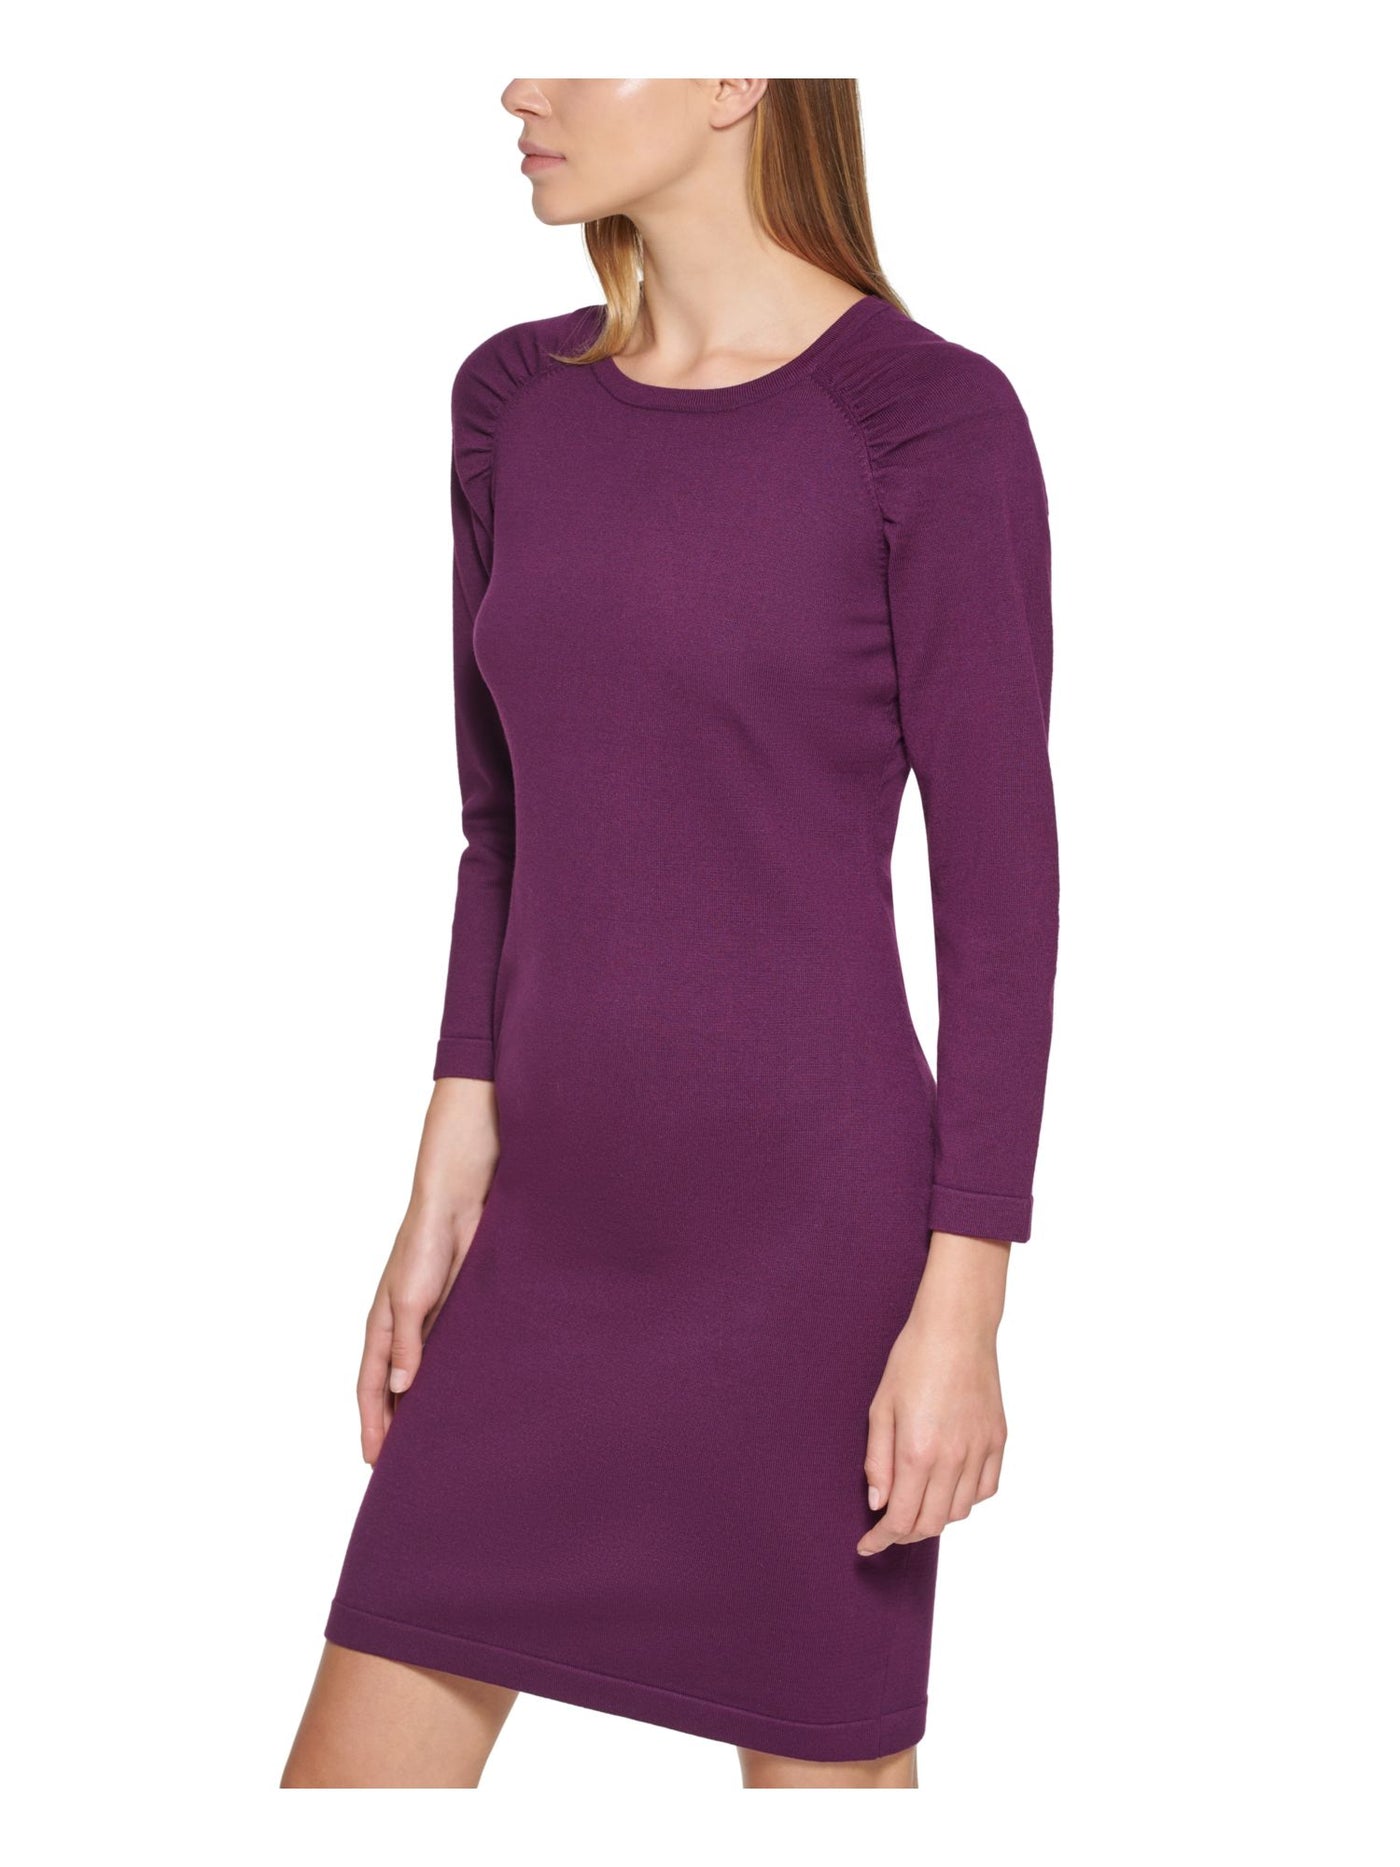 CALVIN KLEIN Womens Purple 3/4 Sleeve Round Neck Above The Knee Party Sweater Dress M